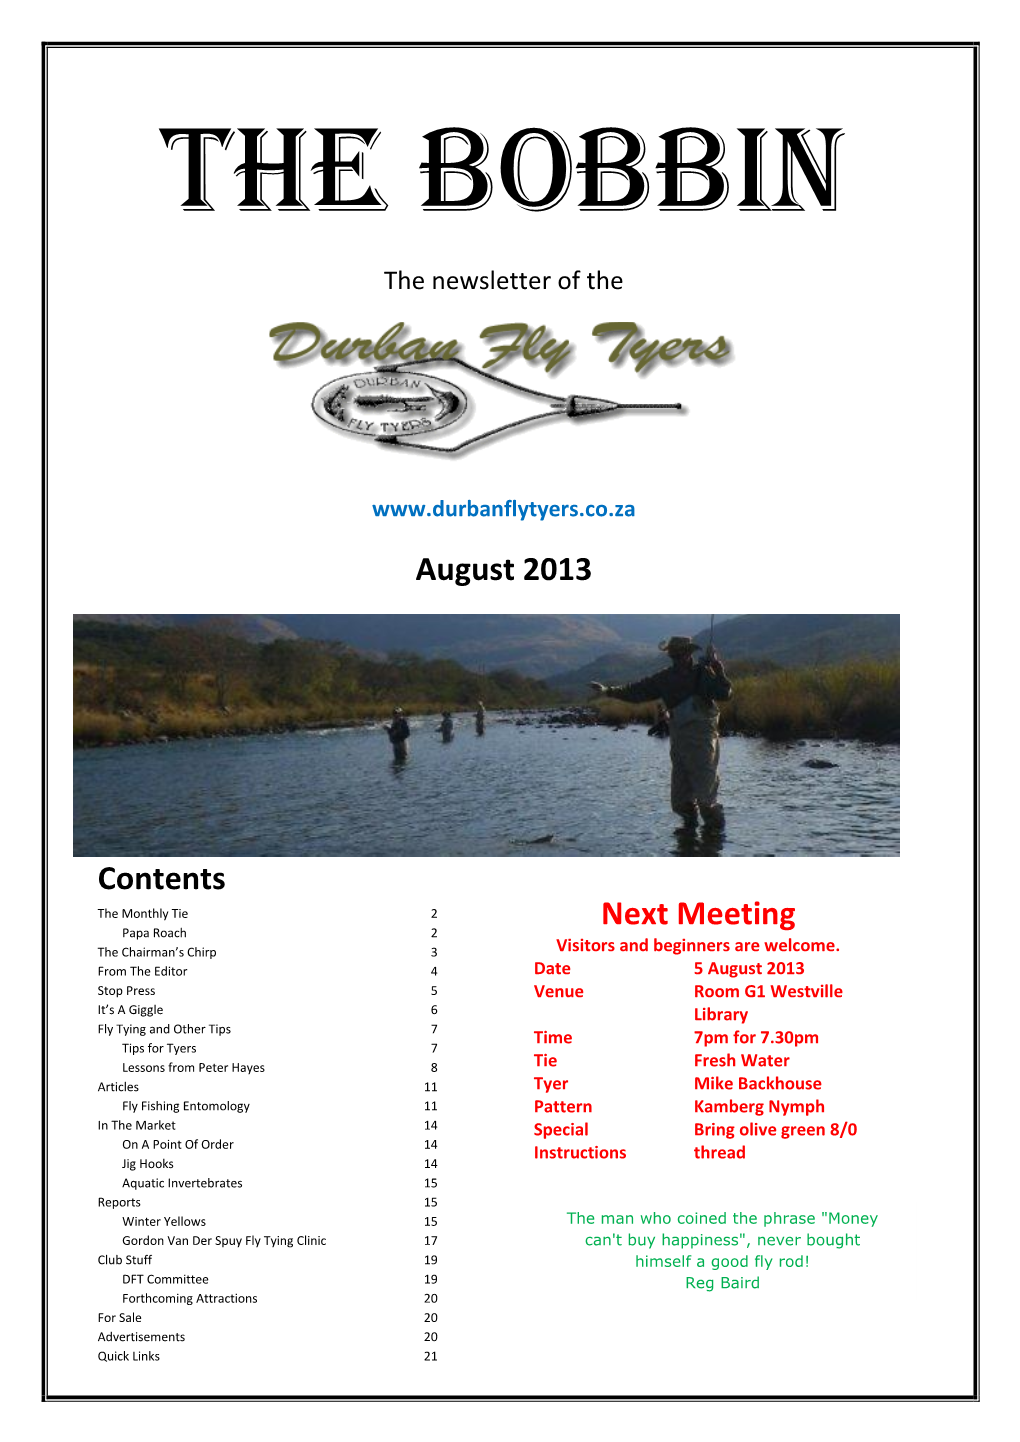 August 2013 Contents Next Meeting